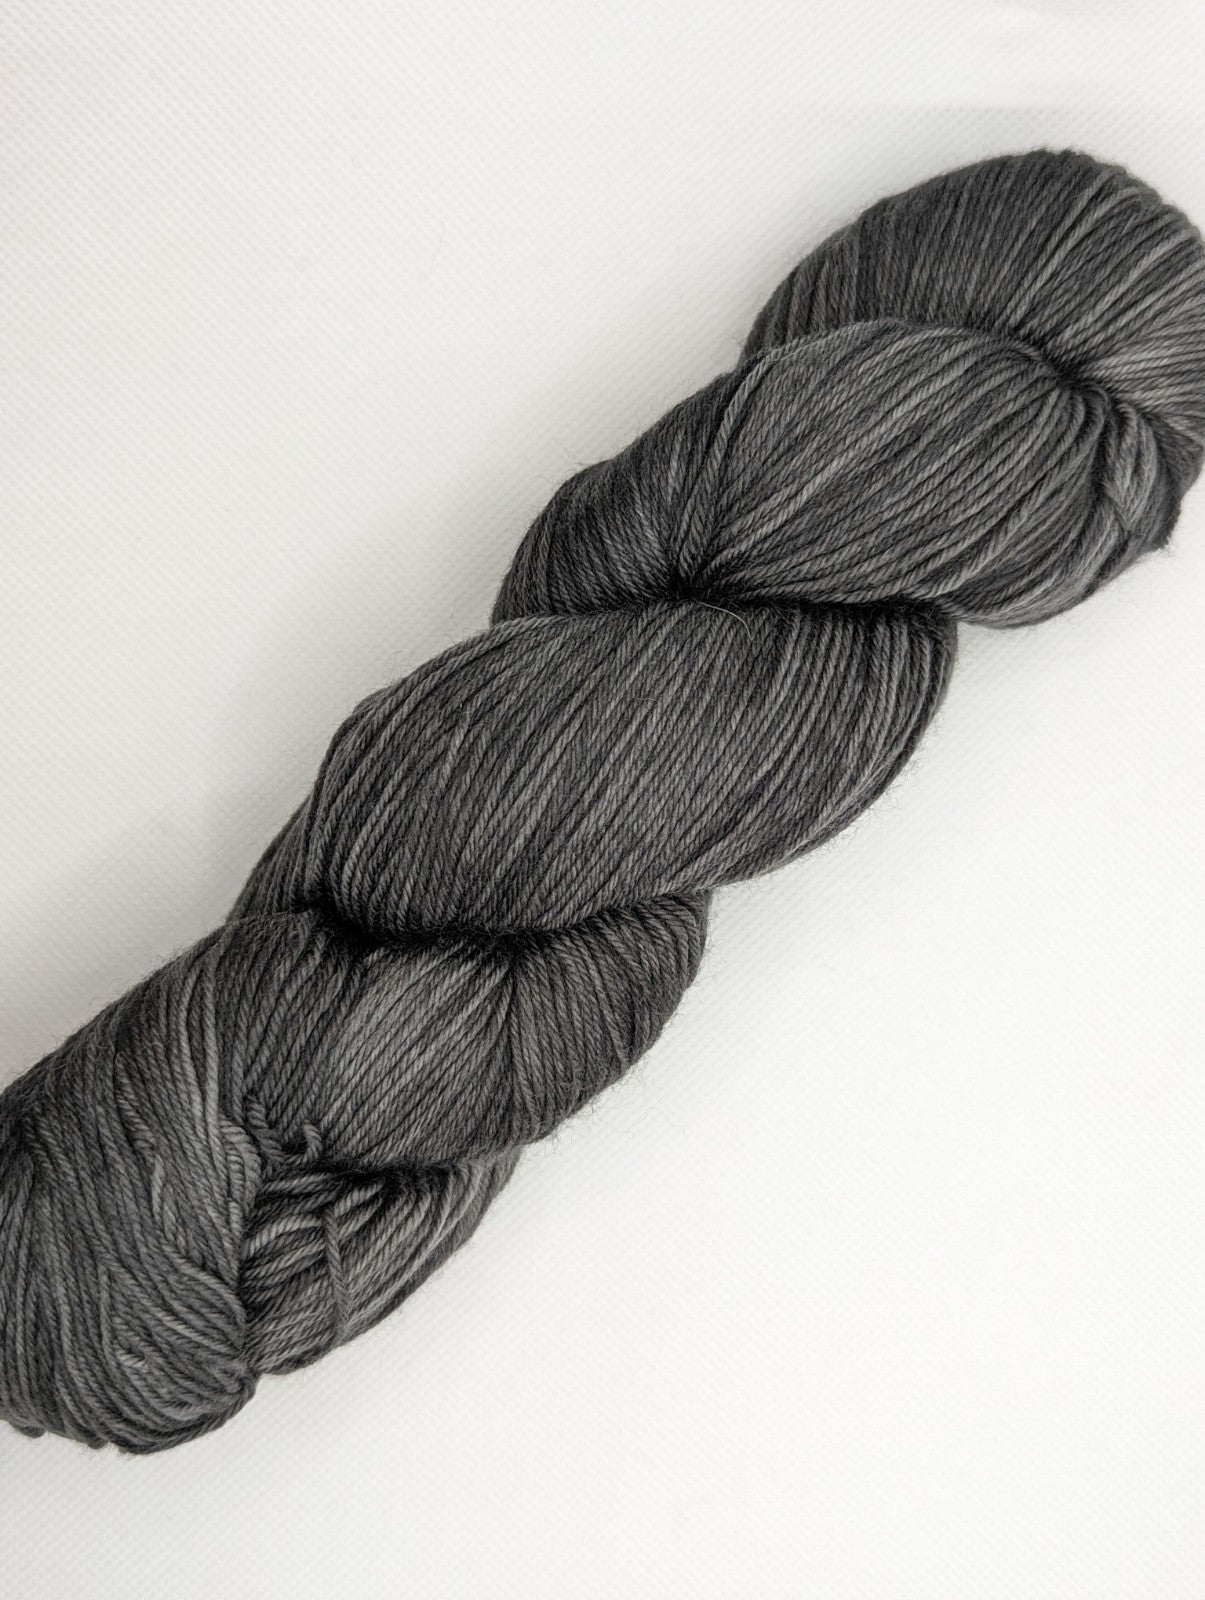 Pooling Yarn and What To Do About It — With Wool